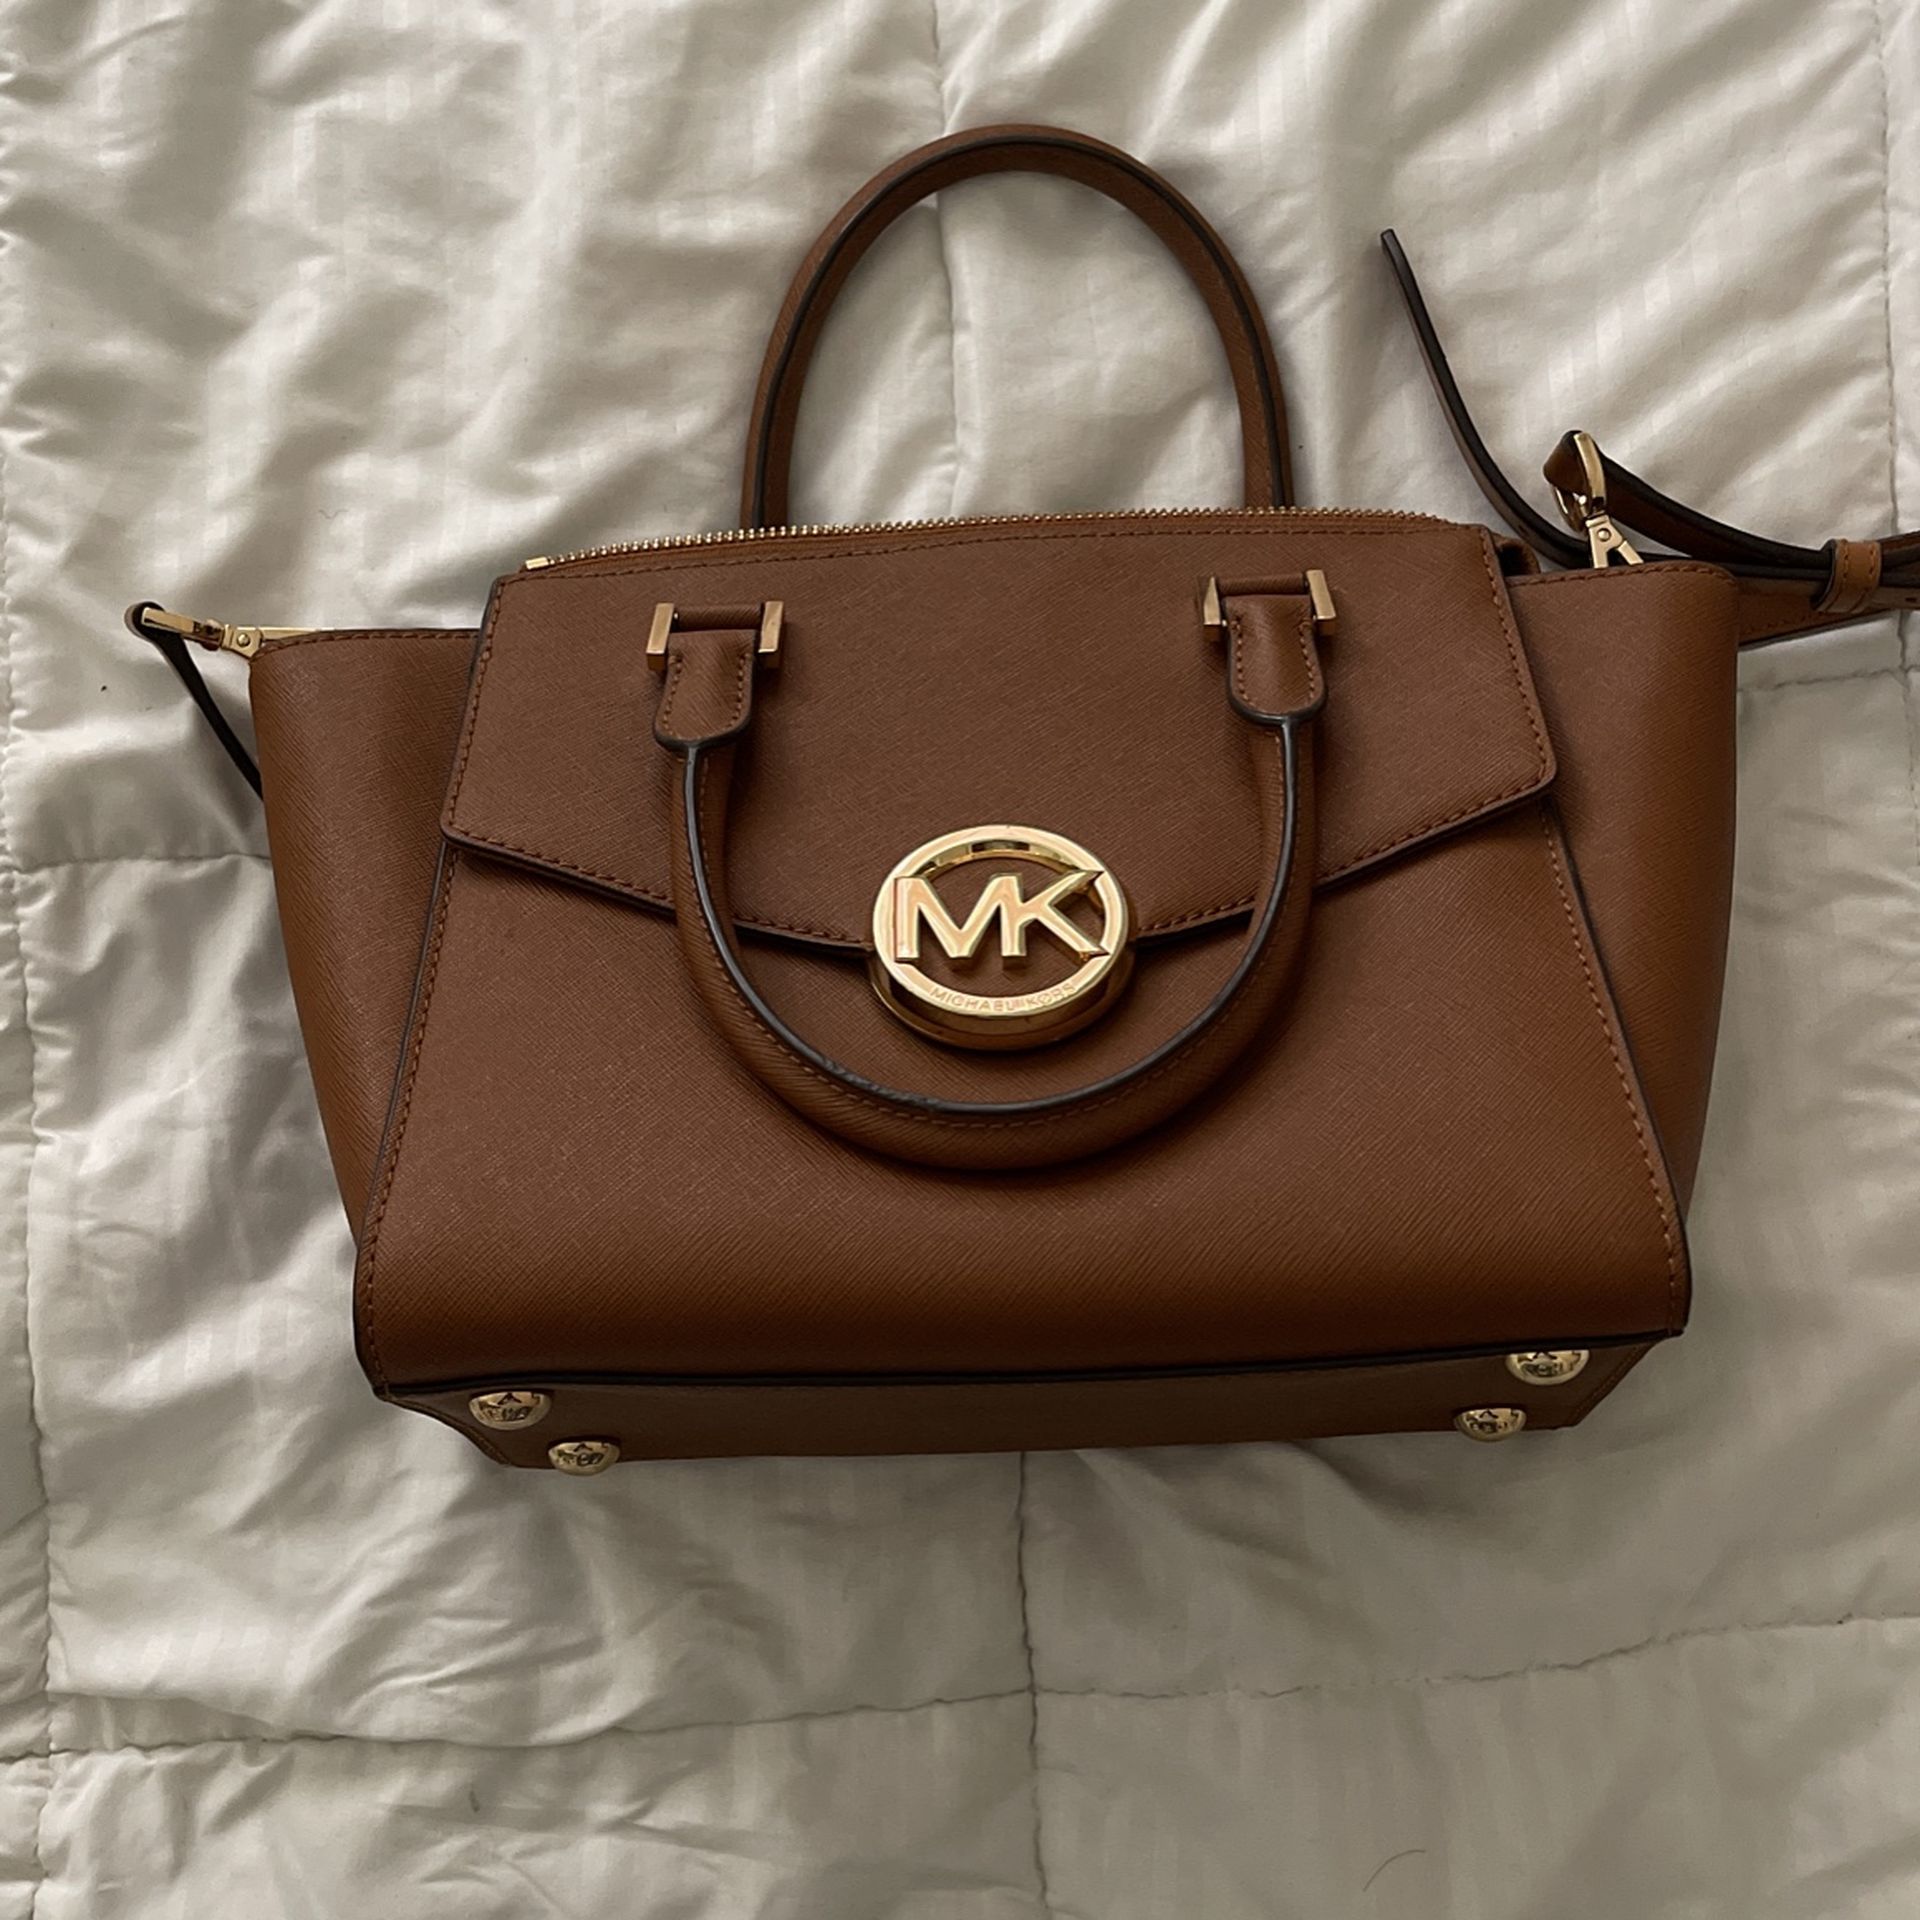 Michael Kors Purse for Sale in Irwindale, CA - OfferUp